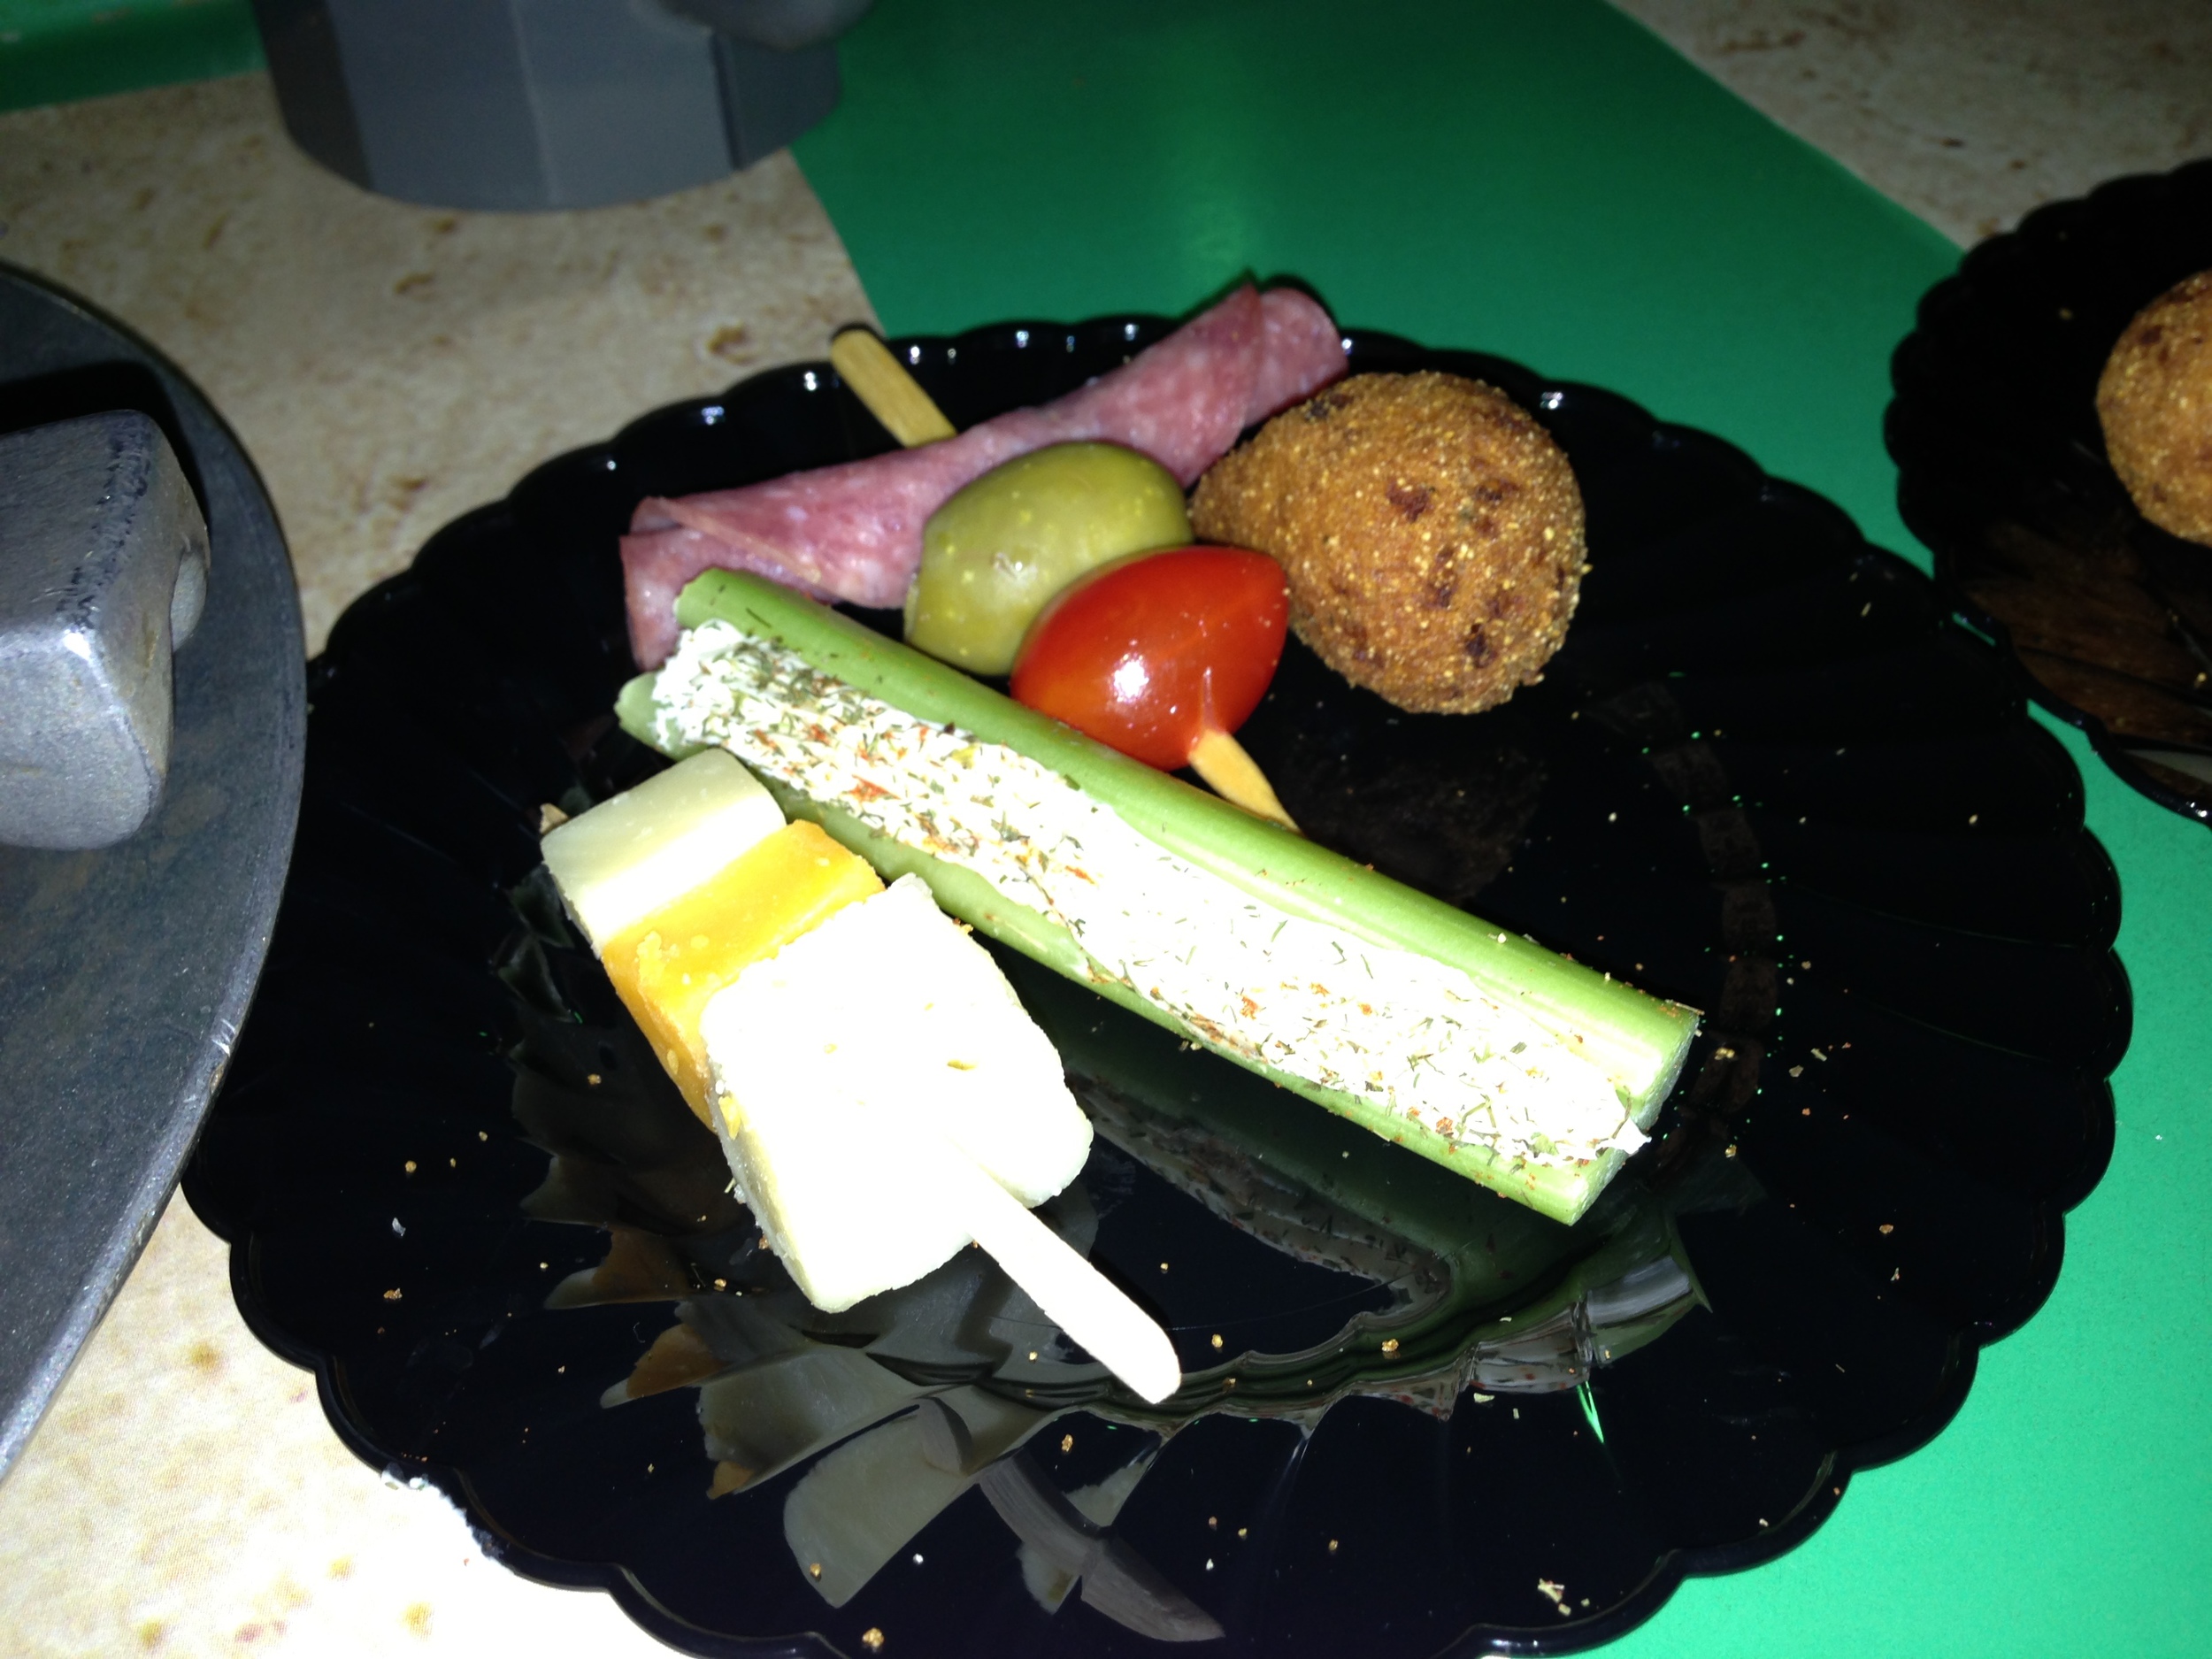  Our appetizer plate, looking distinctly unappetizing. The only thing that was kind of good, was the bread ball thingy. 